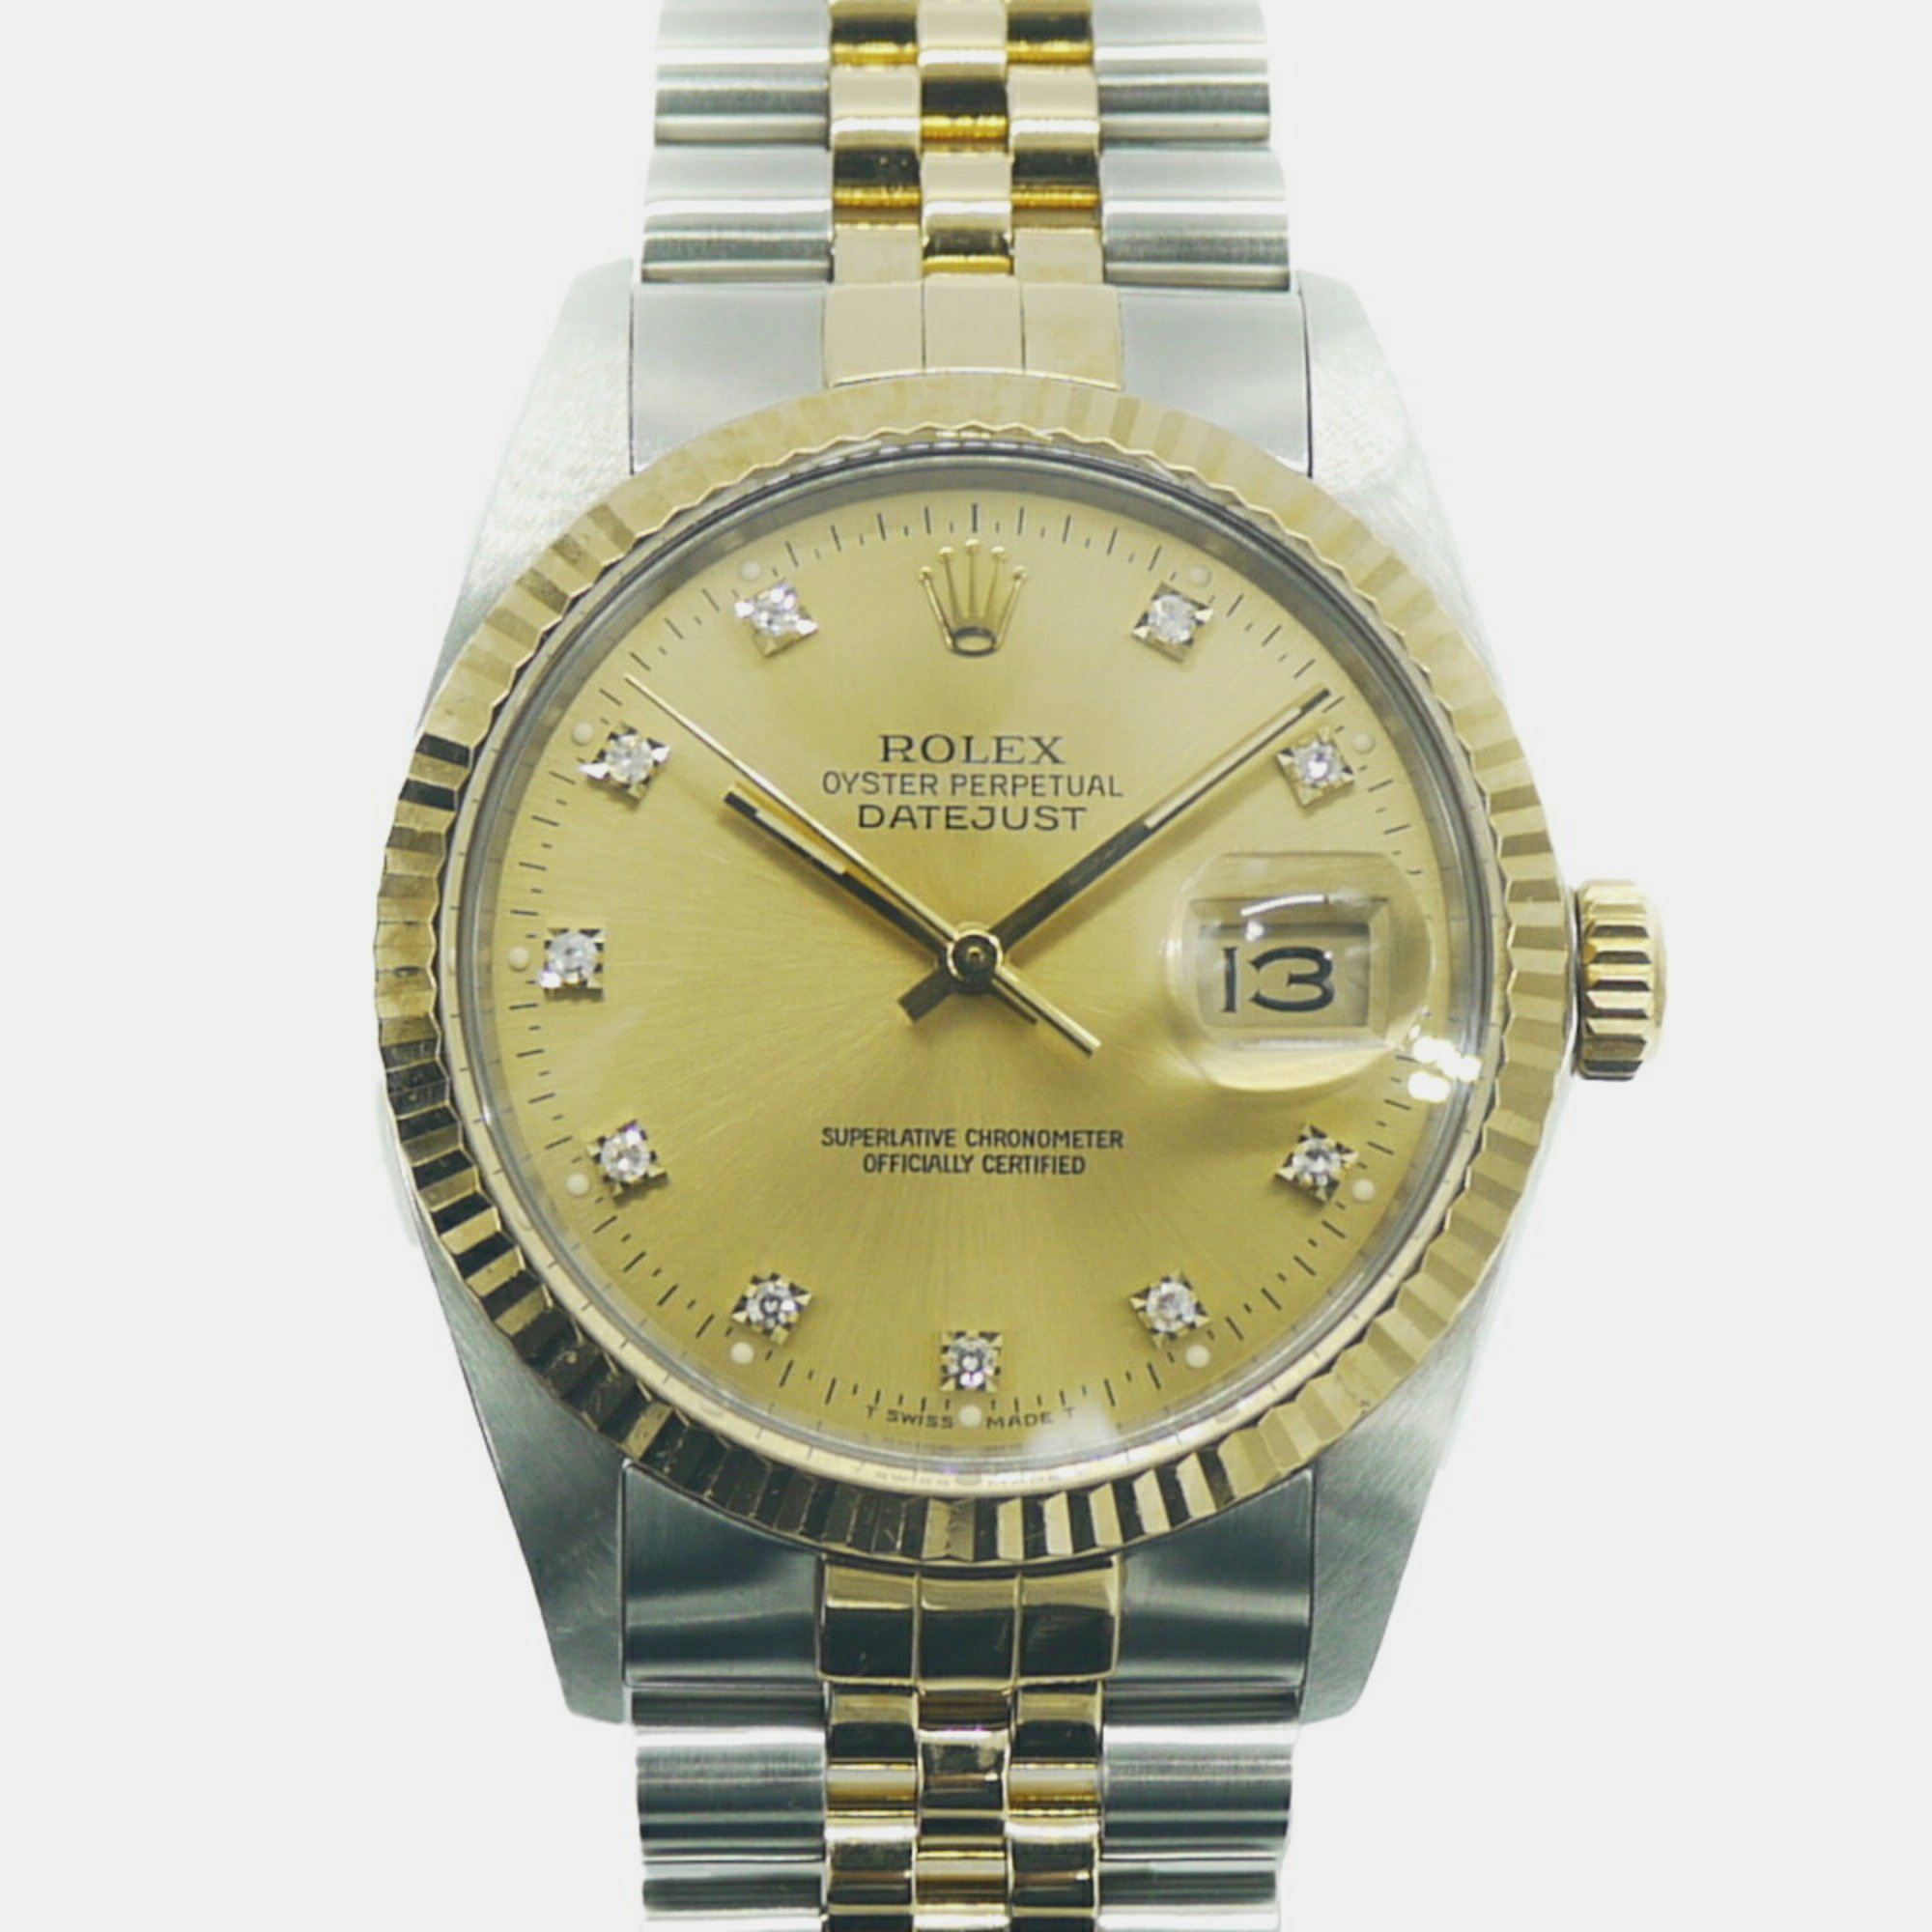 Rolex gold stainless steel and diamond datejust 16013g automatic women's wristwatch 36mm